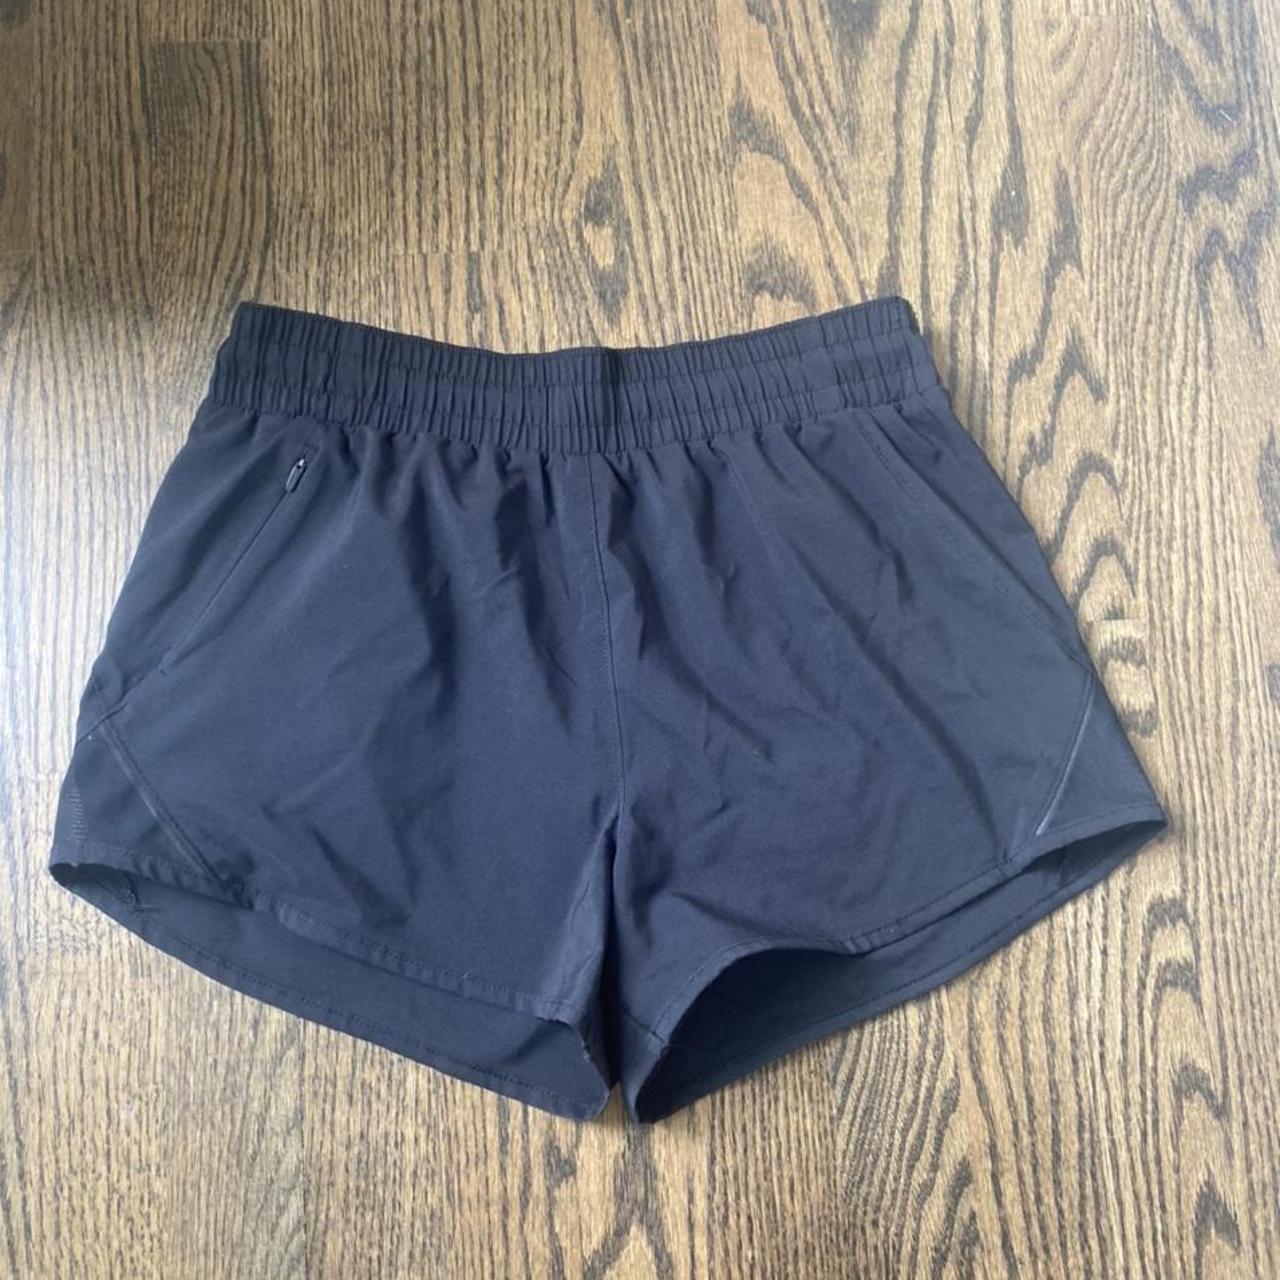 Cute black running shorts from Target 🌺, Size S tag